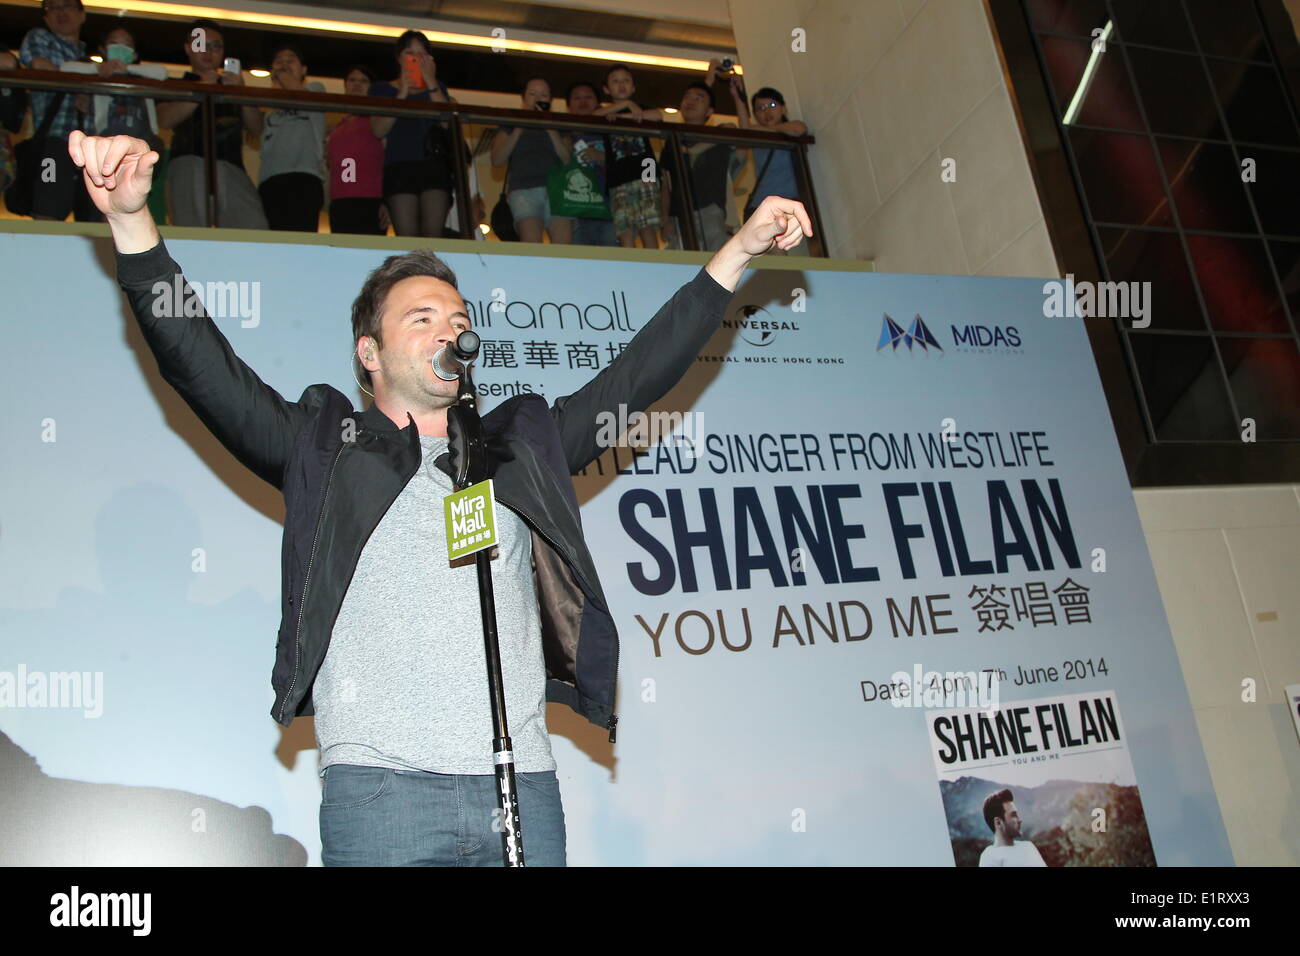 Hong Kong, China. 7th June, 2014. Former lead singer from Westlife Shane Filan promotes new album 'You And Me' in Hong Kong, China on Saturday June 7, 2014. © TopPhoto/Alamy Live News Stock Photo